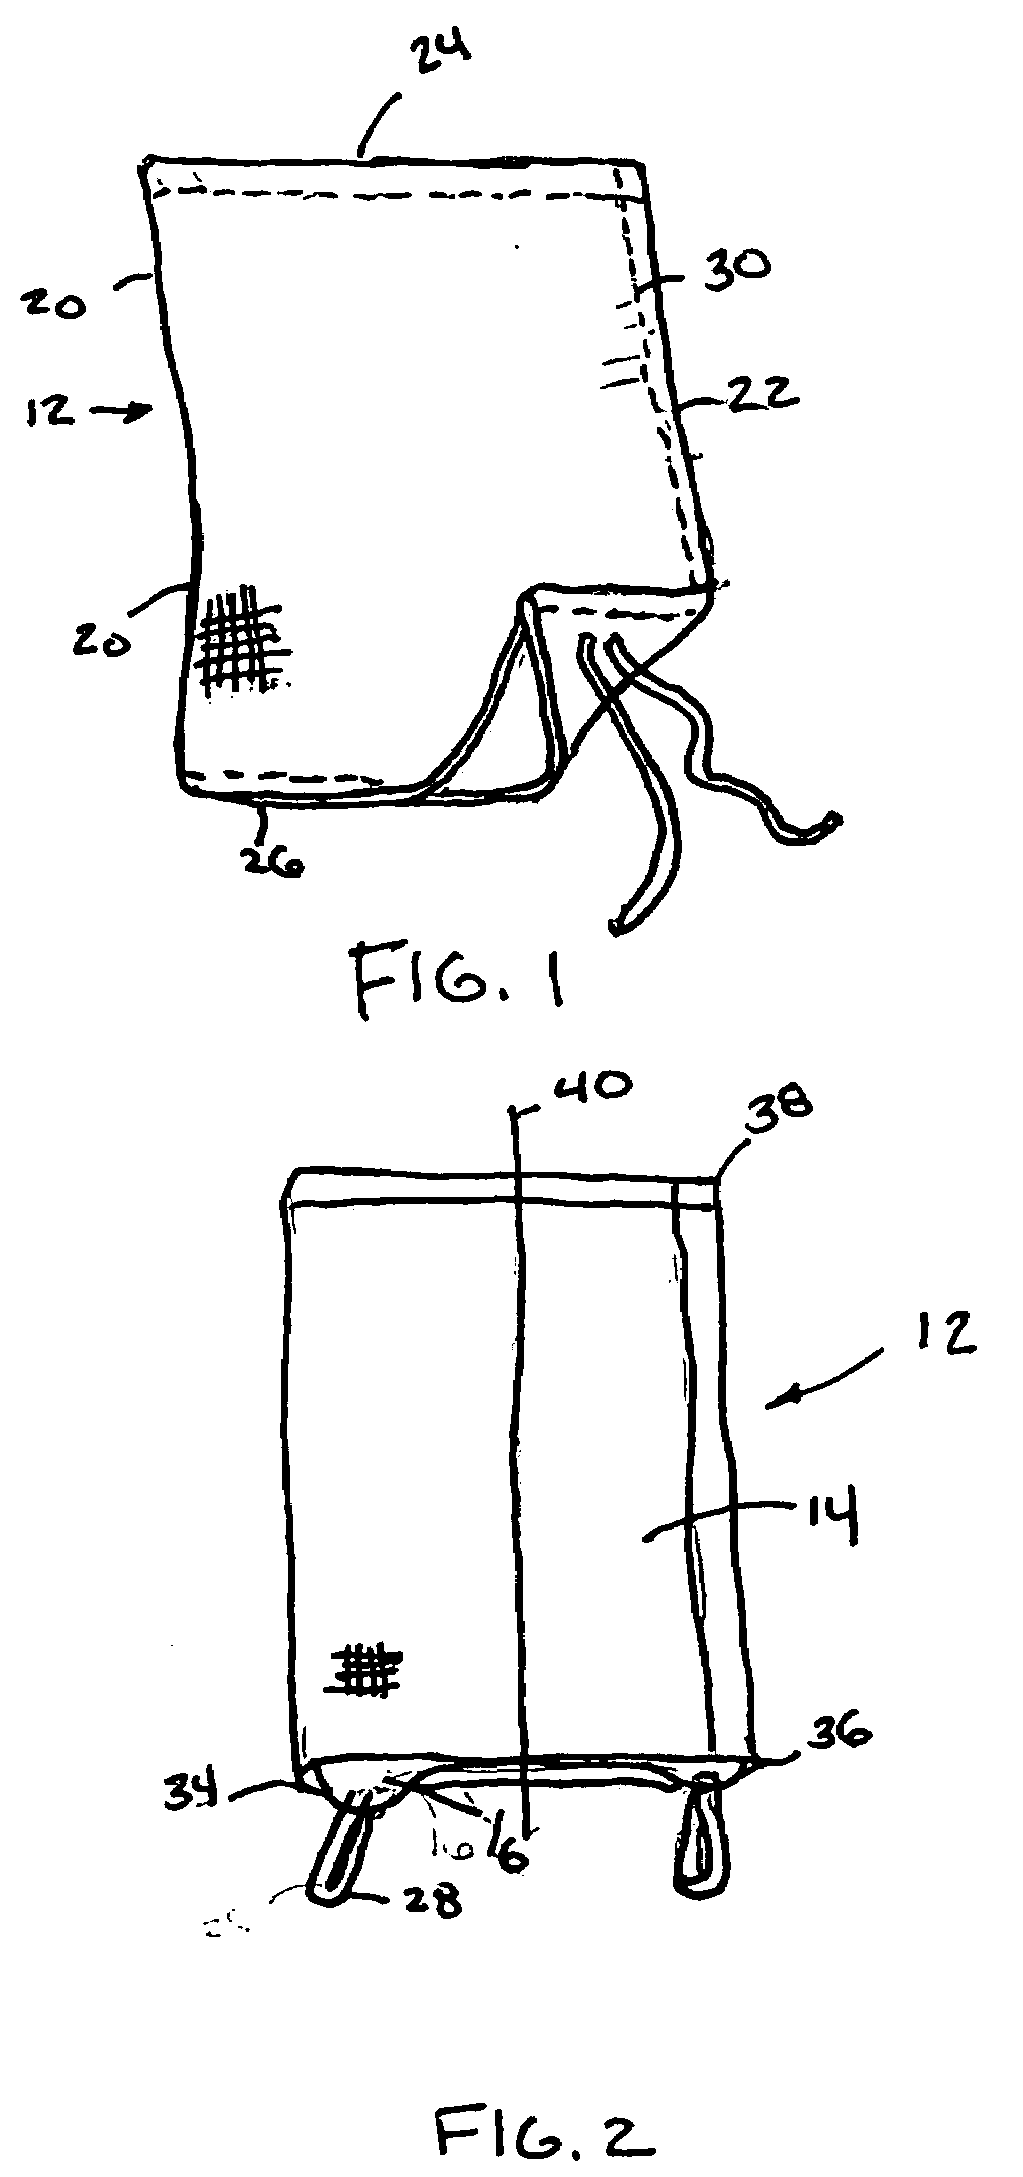 Water flow control product and method of manufacture